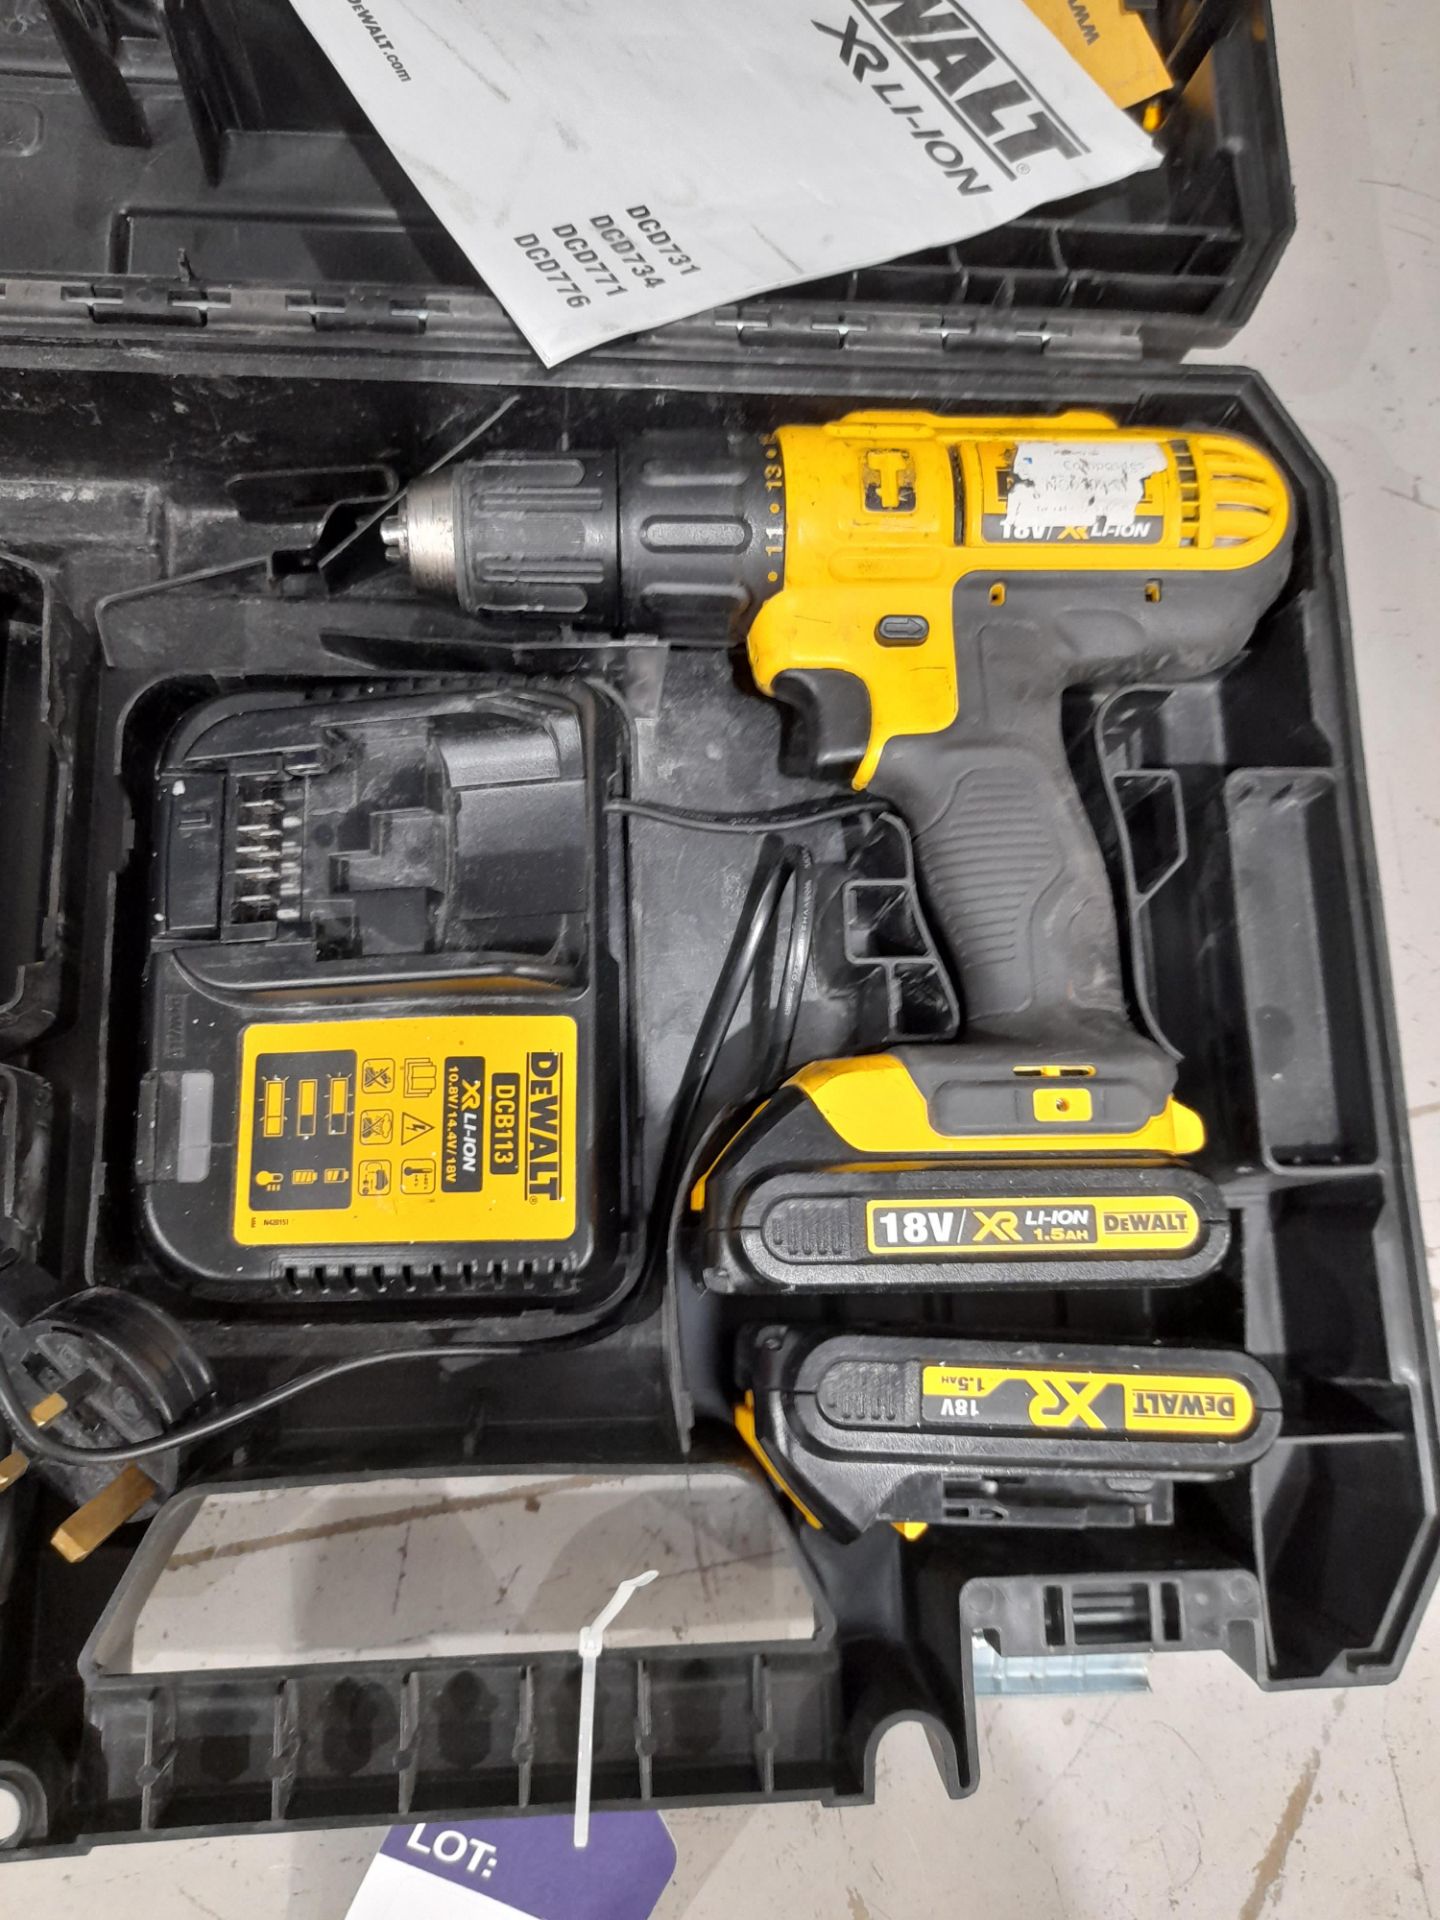 Dewalt DCD776 cordless drill with 2-batteries and battery charger, to plastic case - Image 2 of 2